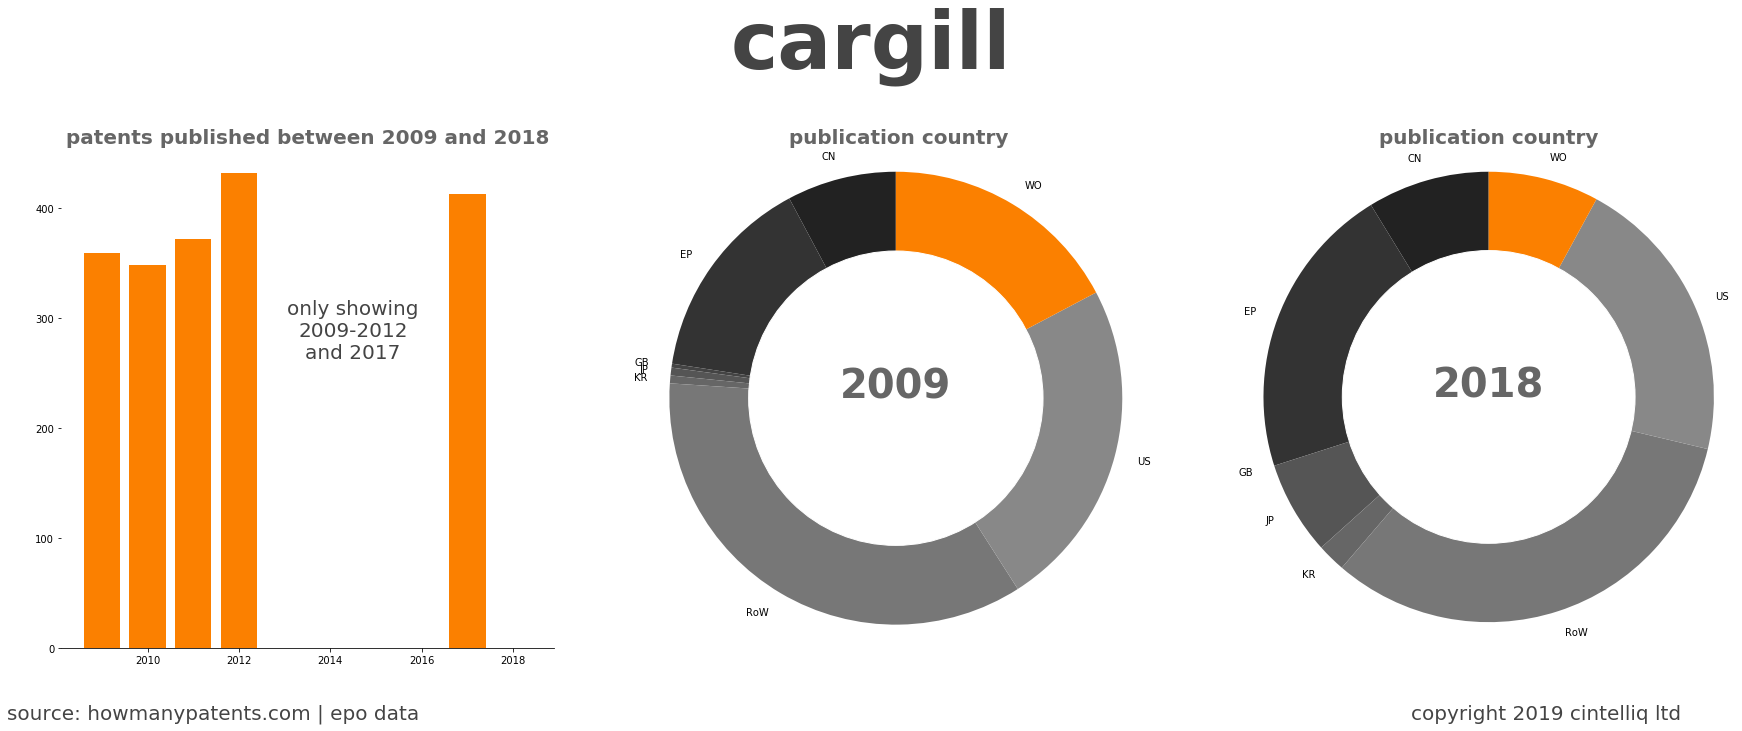 summary of patents for Cargill